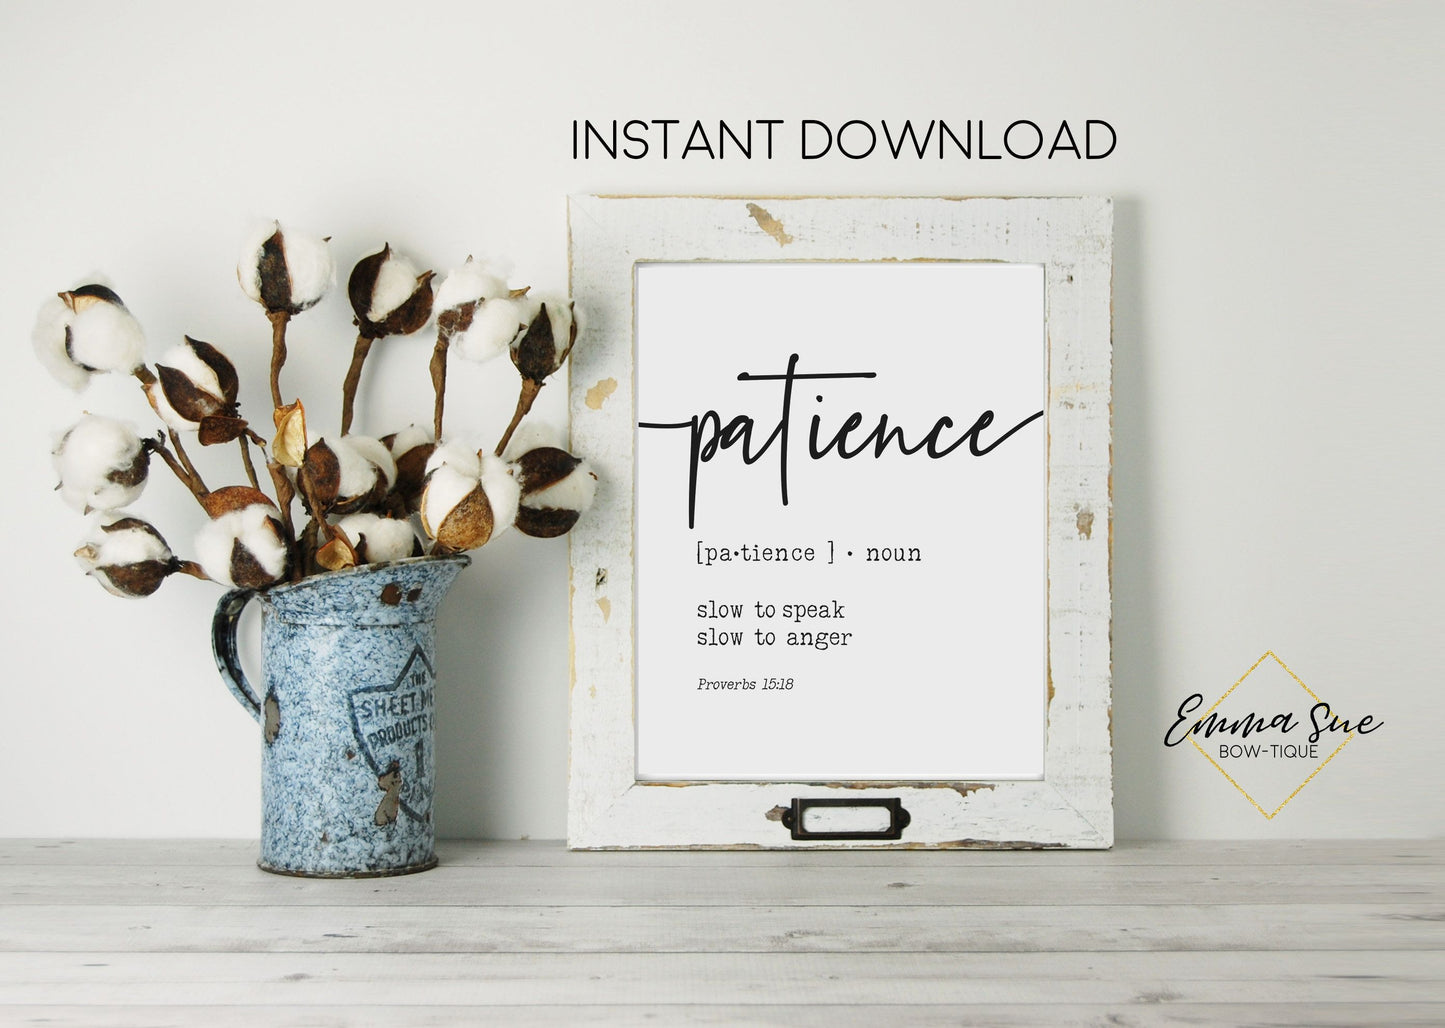 Patience Definition Proverbs 15:18 Bible Verse - Christian Farmhouse Wall Art Printable Sign